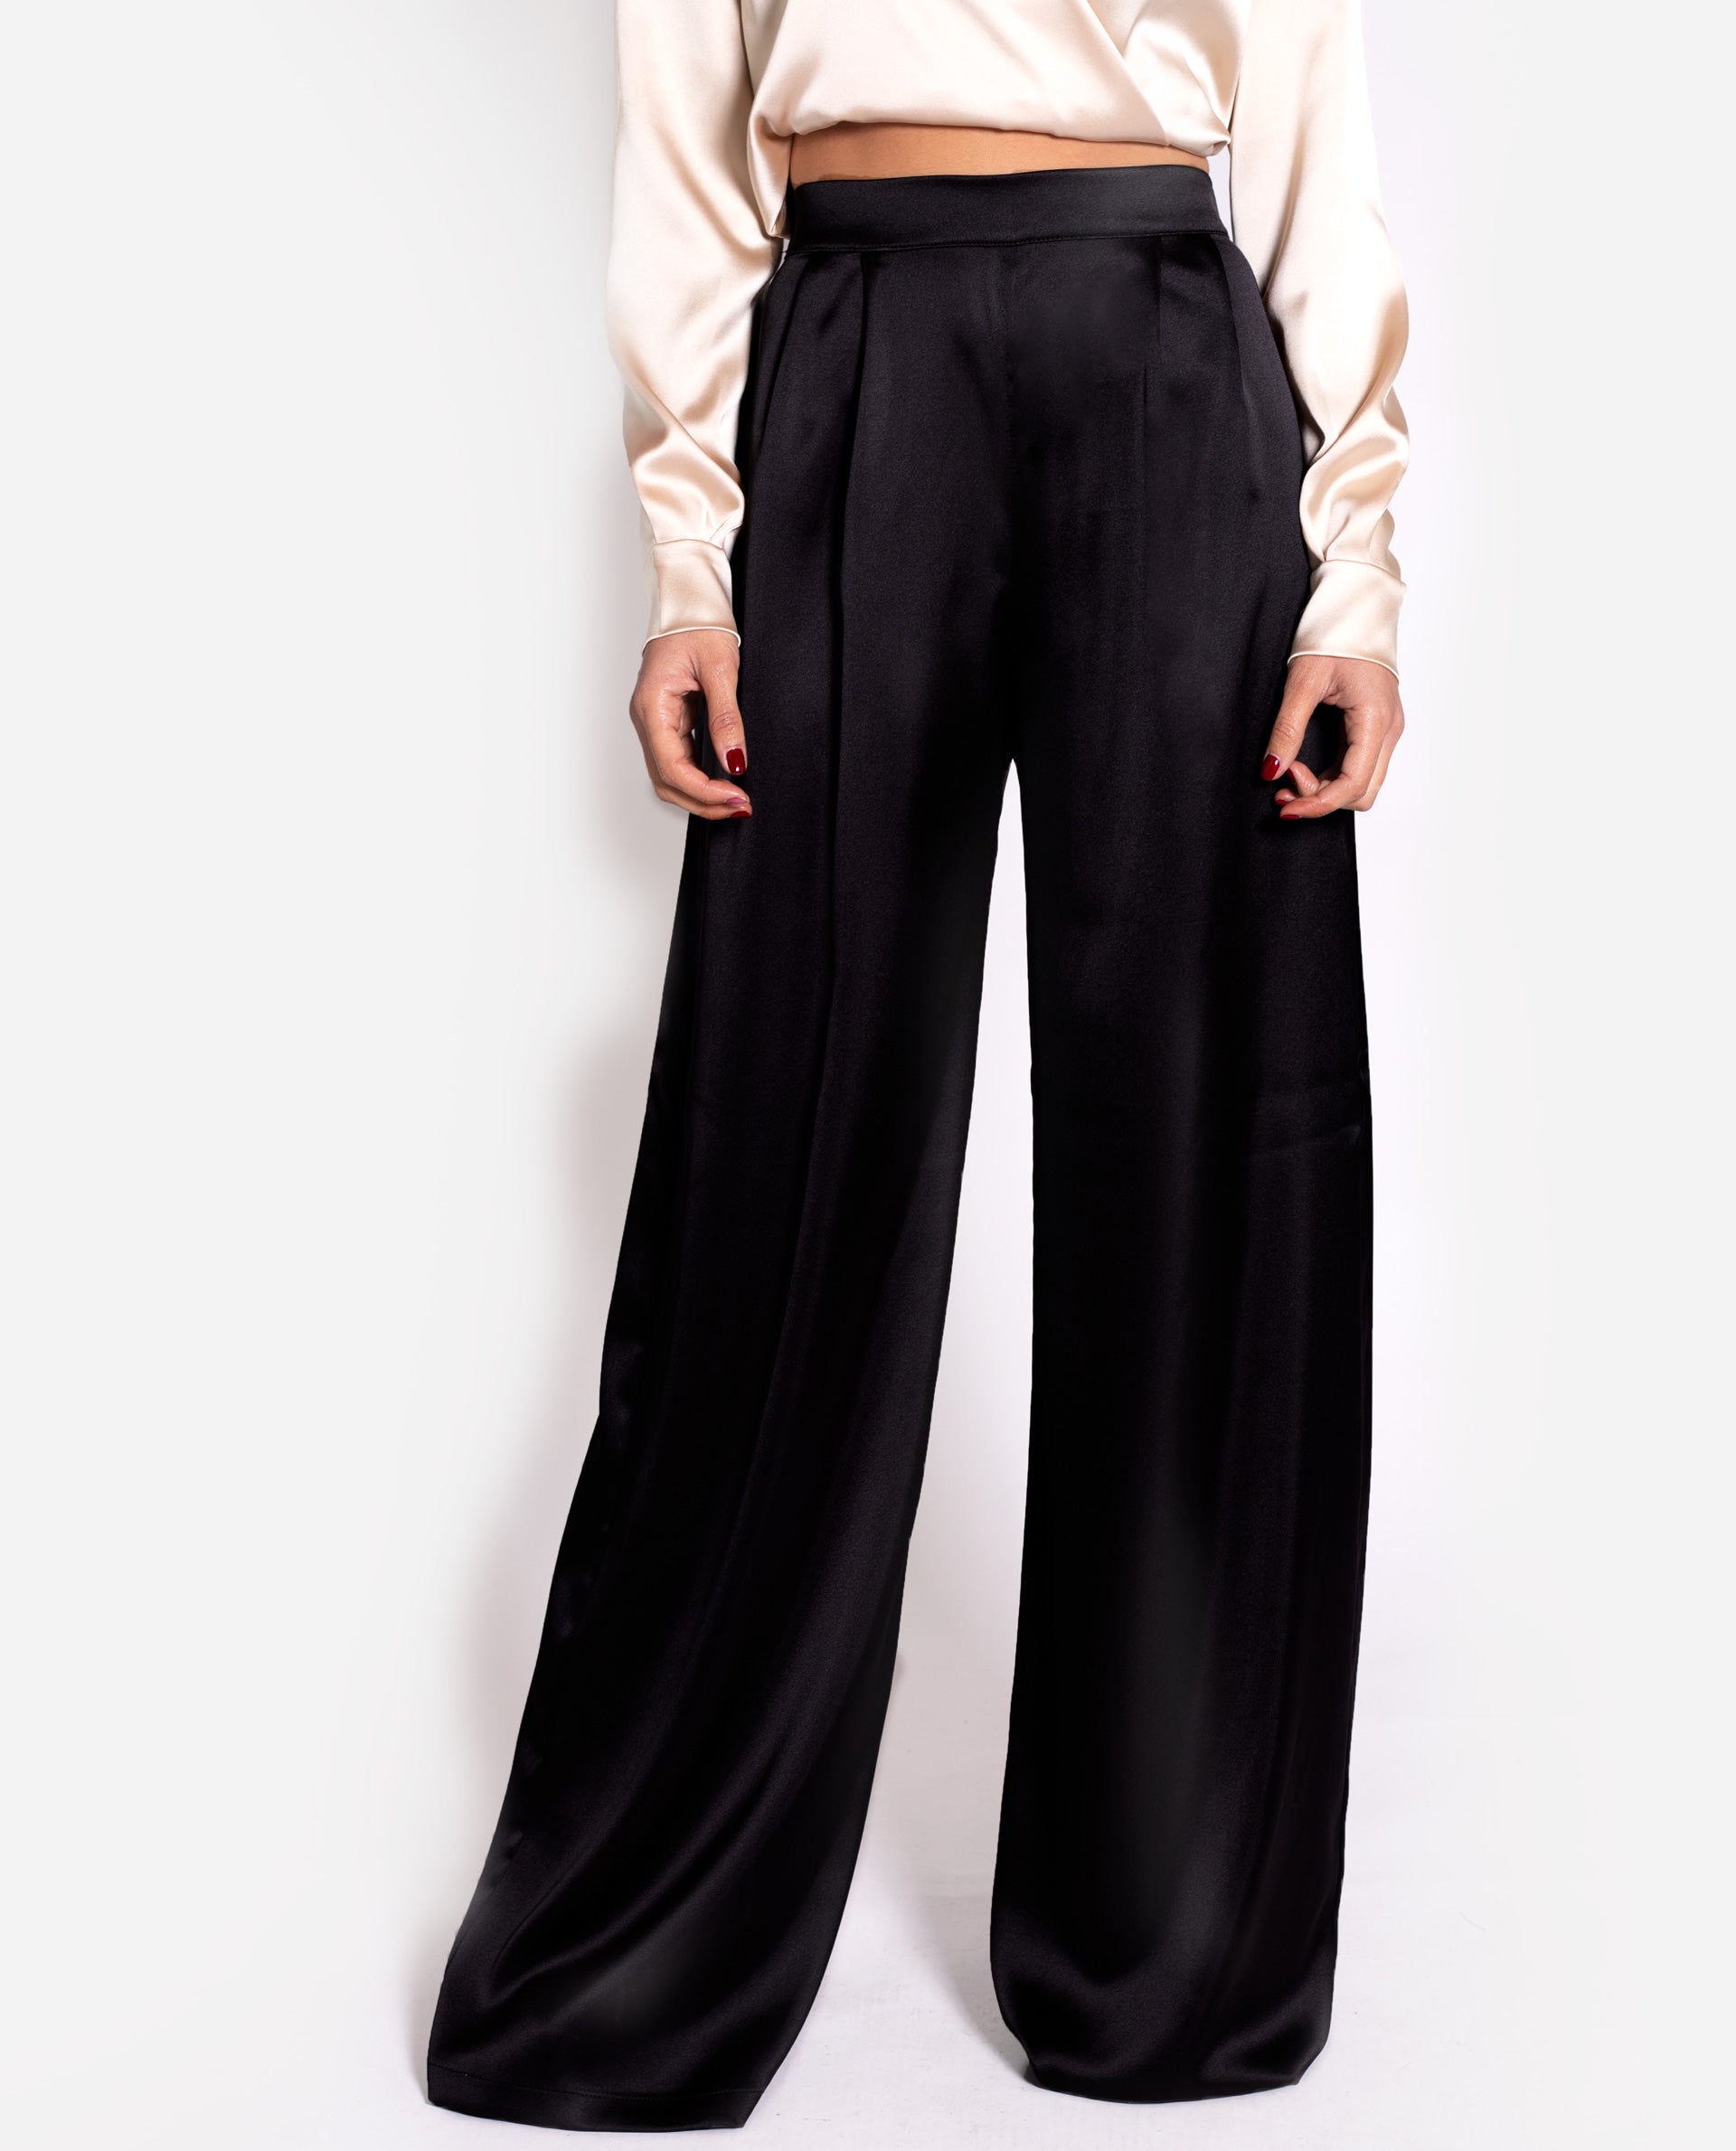 talle de mujer | Pantalonez palazzo THE-ARE